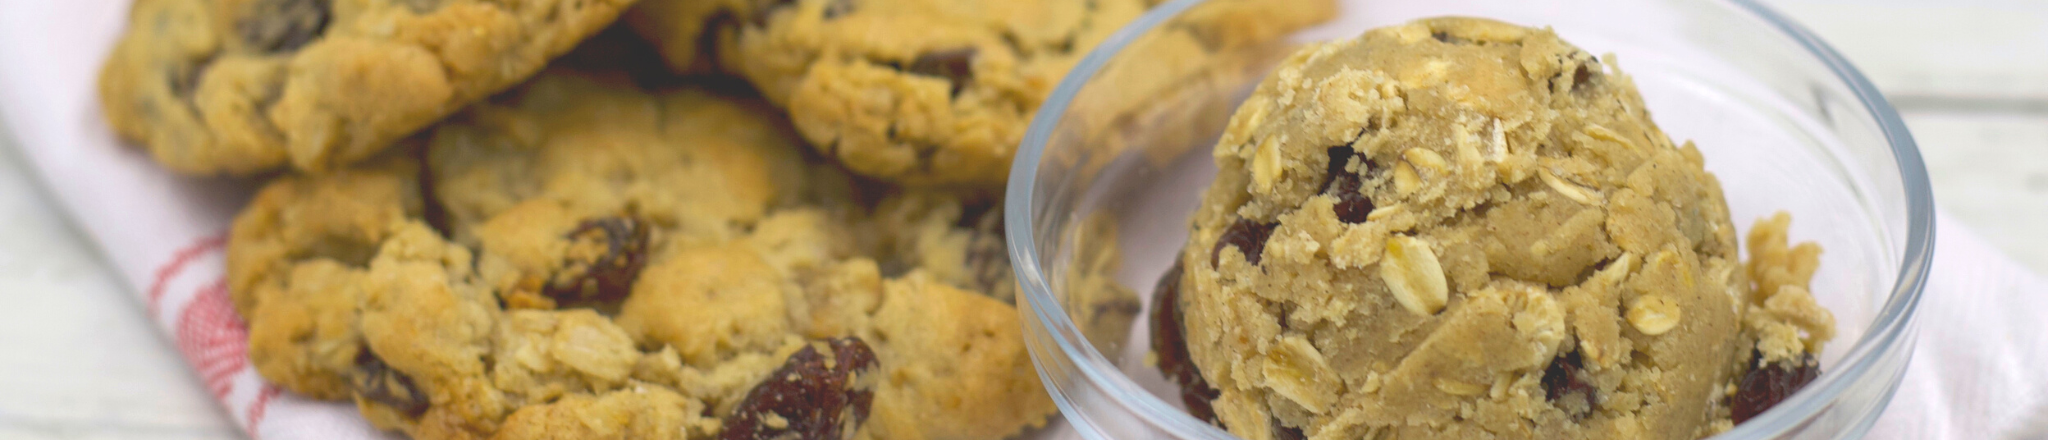 LET'S MAKE SOME EDIBLE COOKIE DOUGH & BAKE COOKIES – IT'S EASY! WATCH NOW